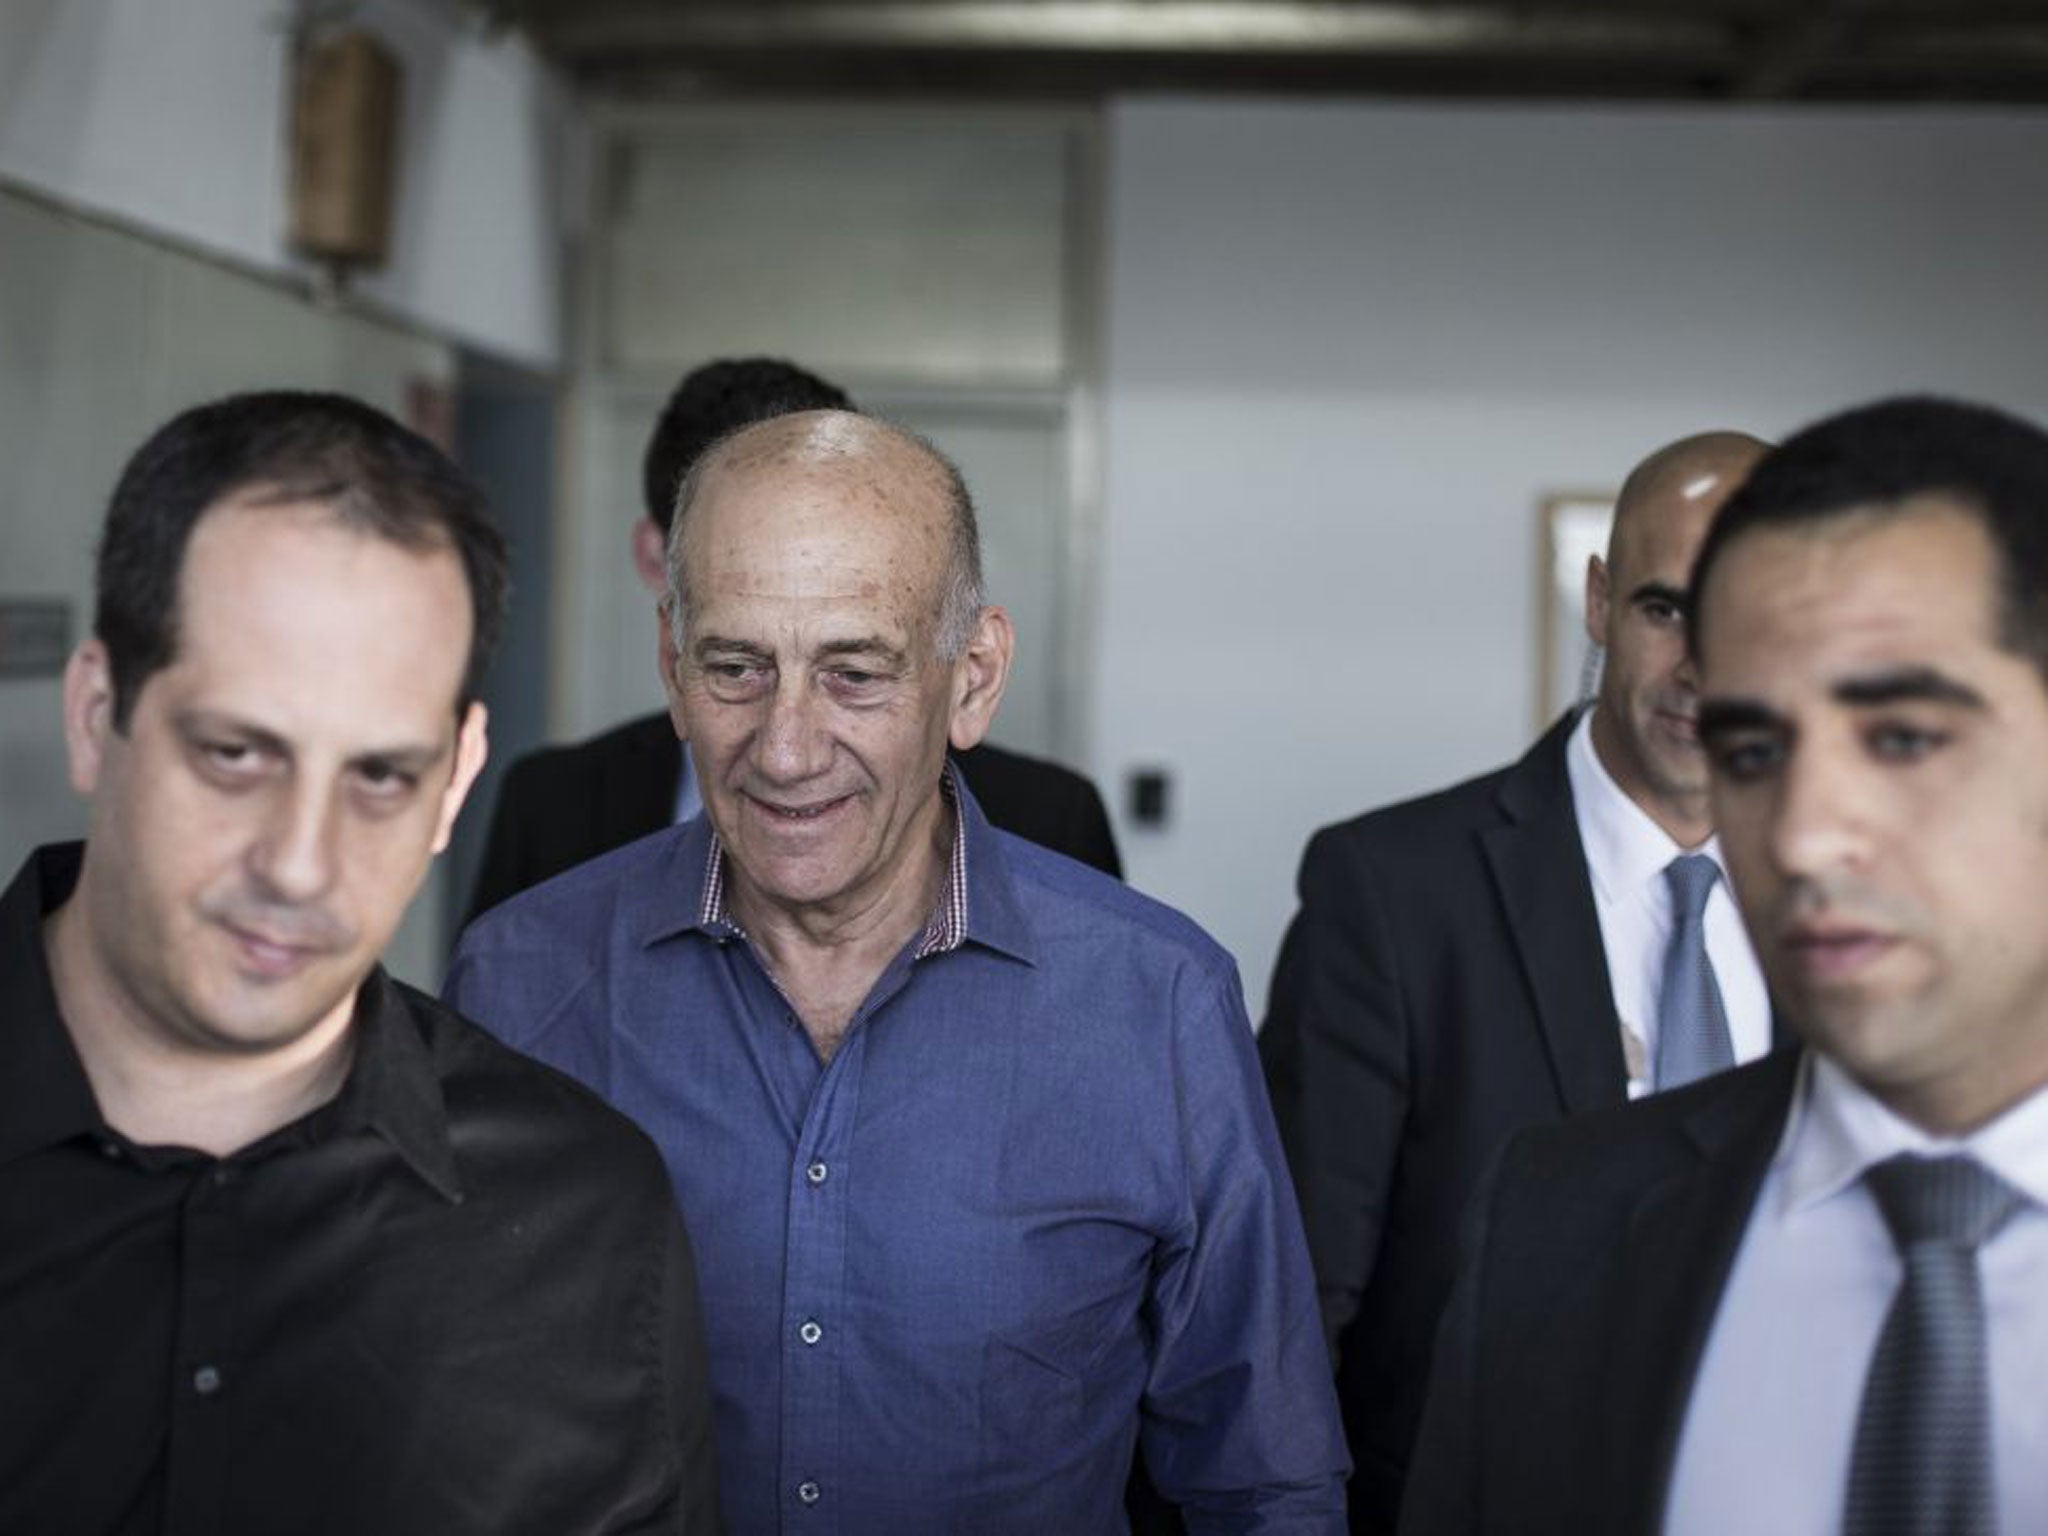 The former Israeli Prime Minister, centre, arrived in court to face charges related to his time as Mayor of Jerusalem